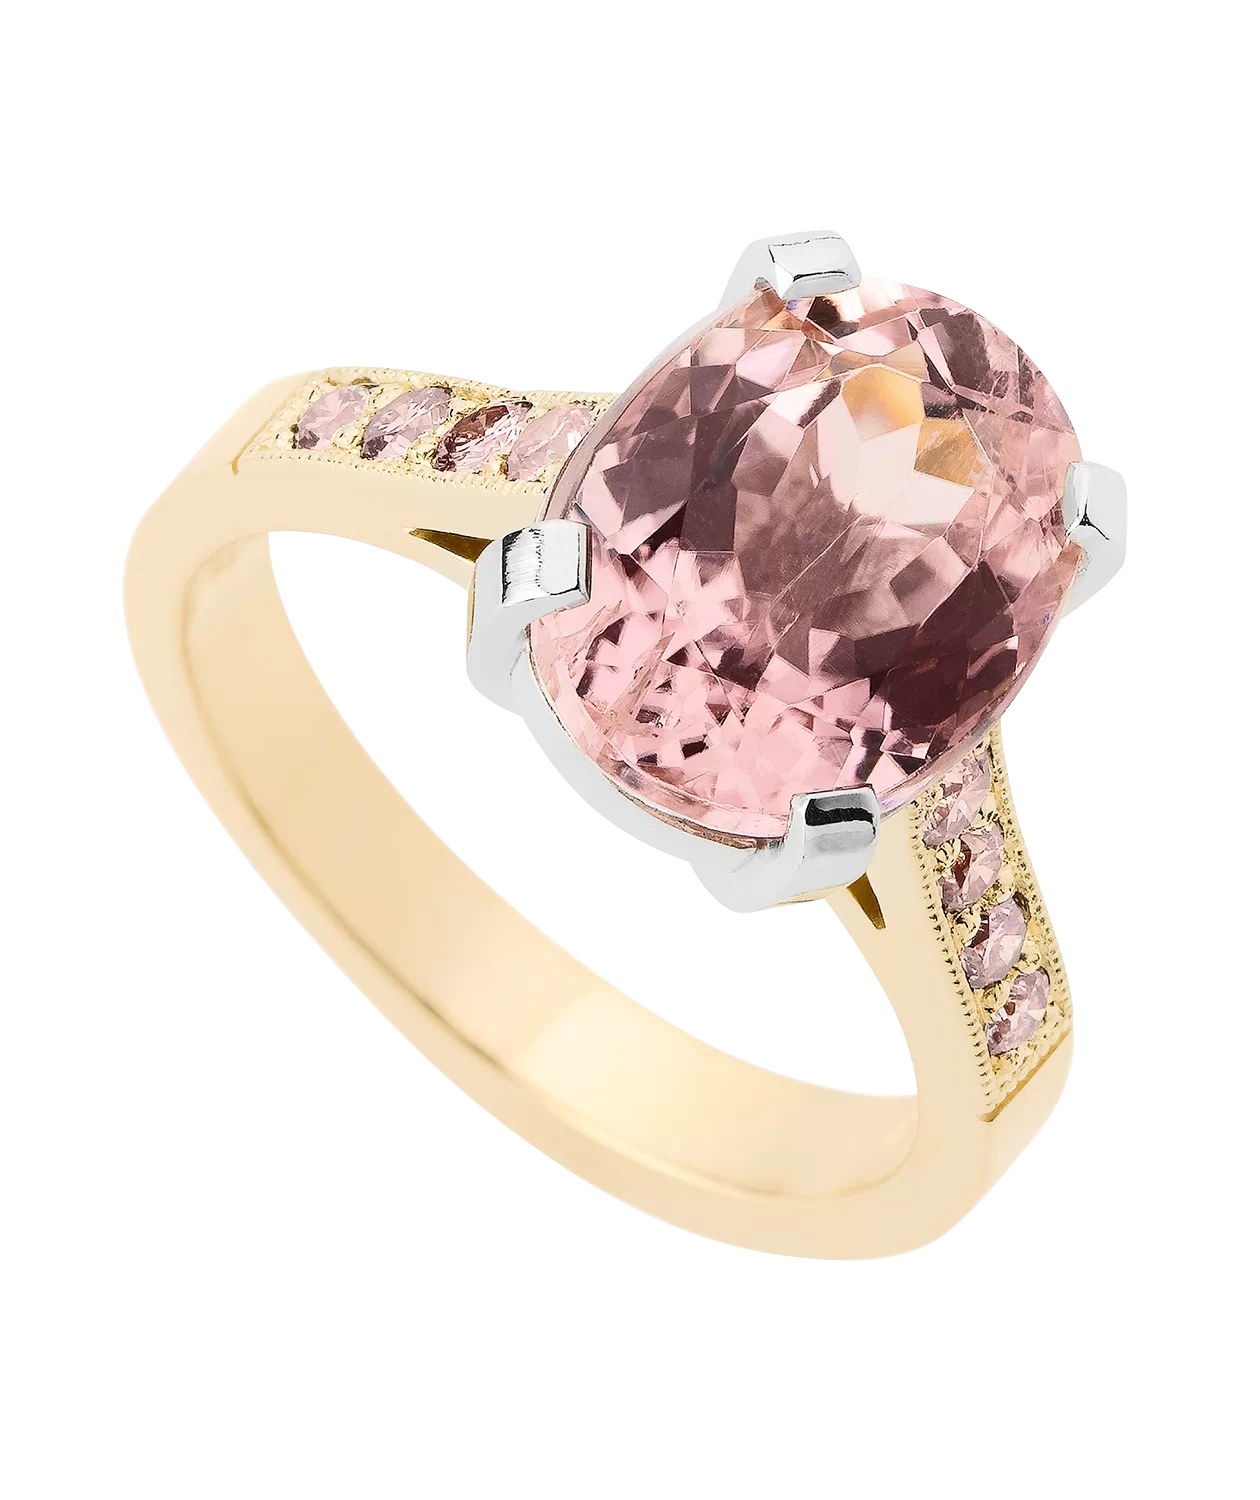 Estate Platinum Ring with Blush Pink Tourmaline & Diamonds | Exquisite  Jewelry for Every Occasion | FWCJ